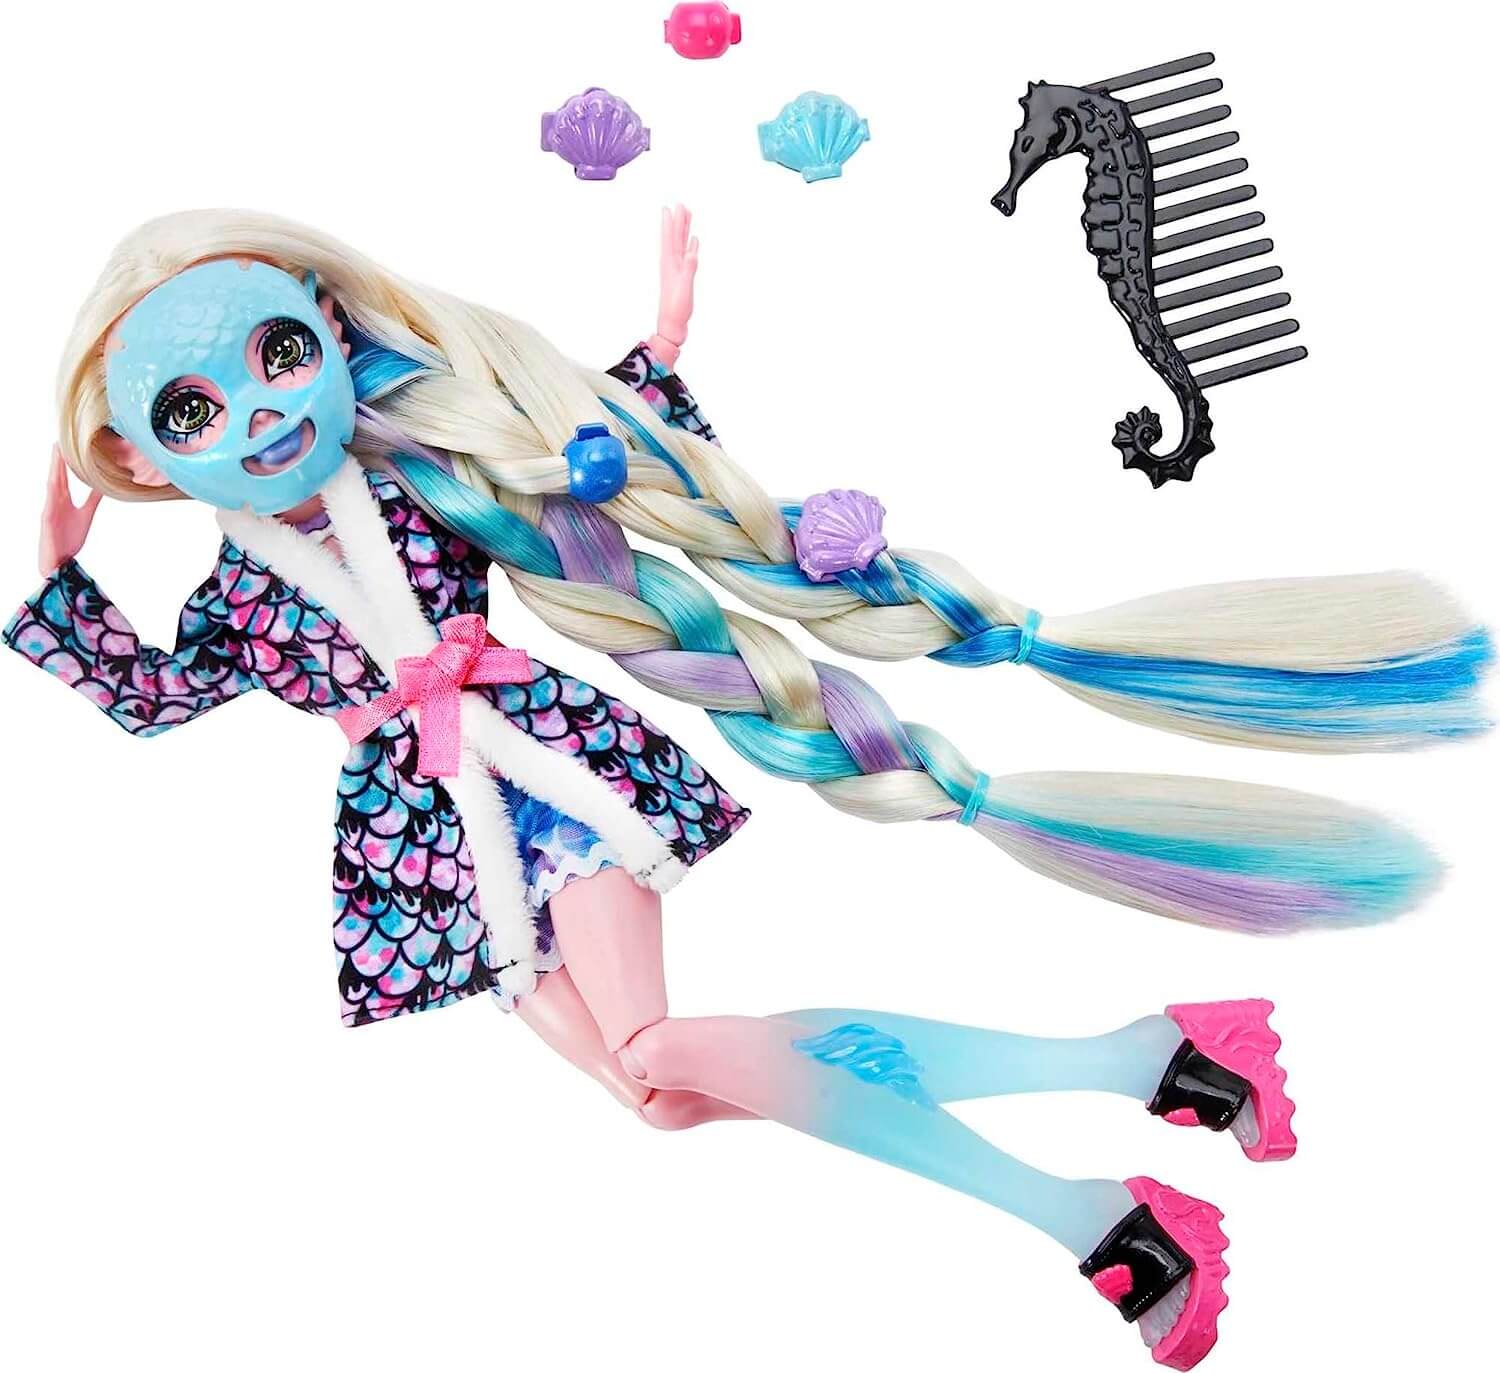 Spa mask and comb with doll from the Monster High Lagoona Blue Spa Day Doll and Accessories